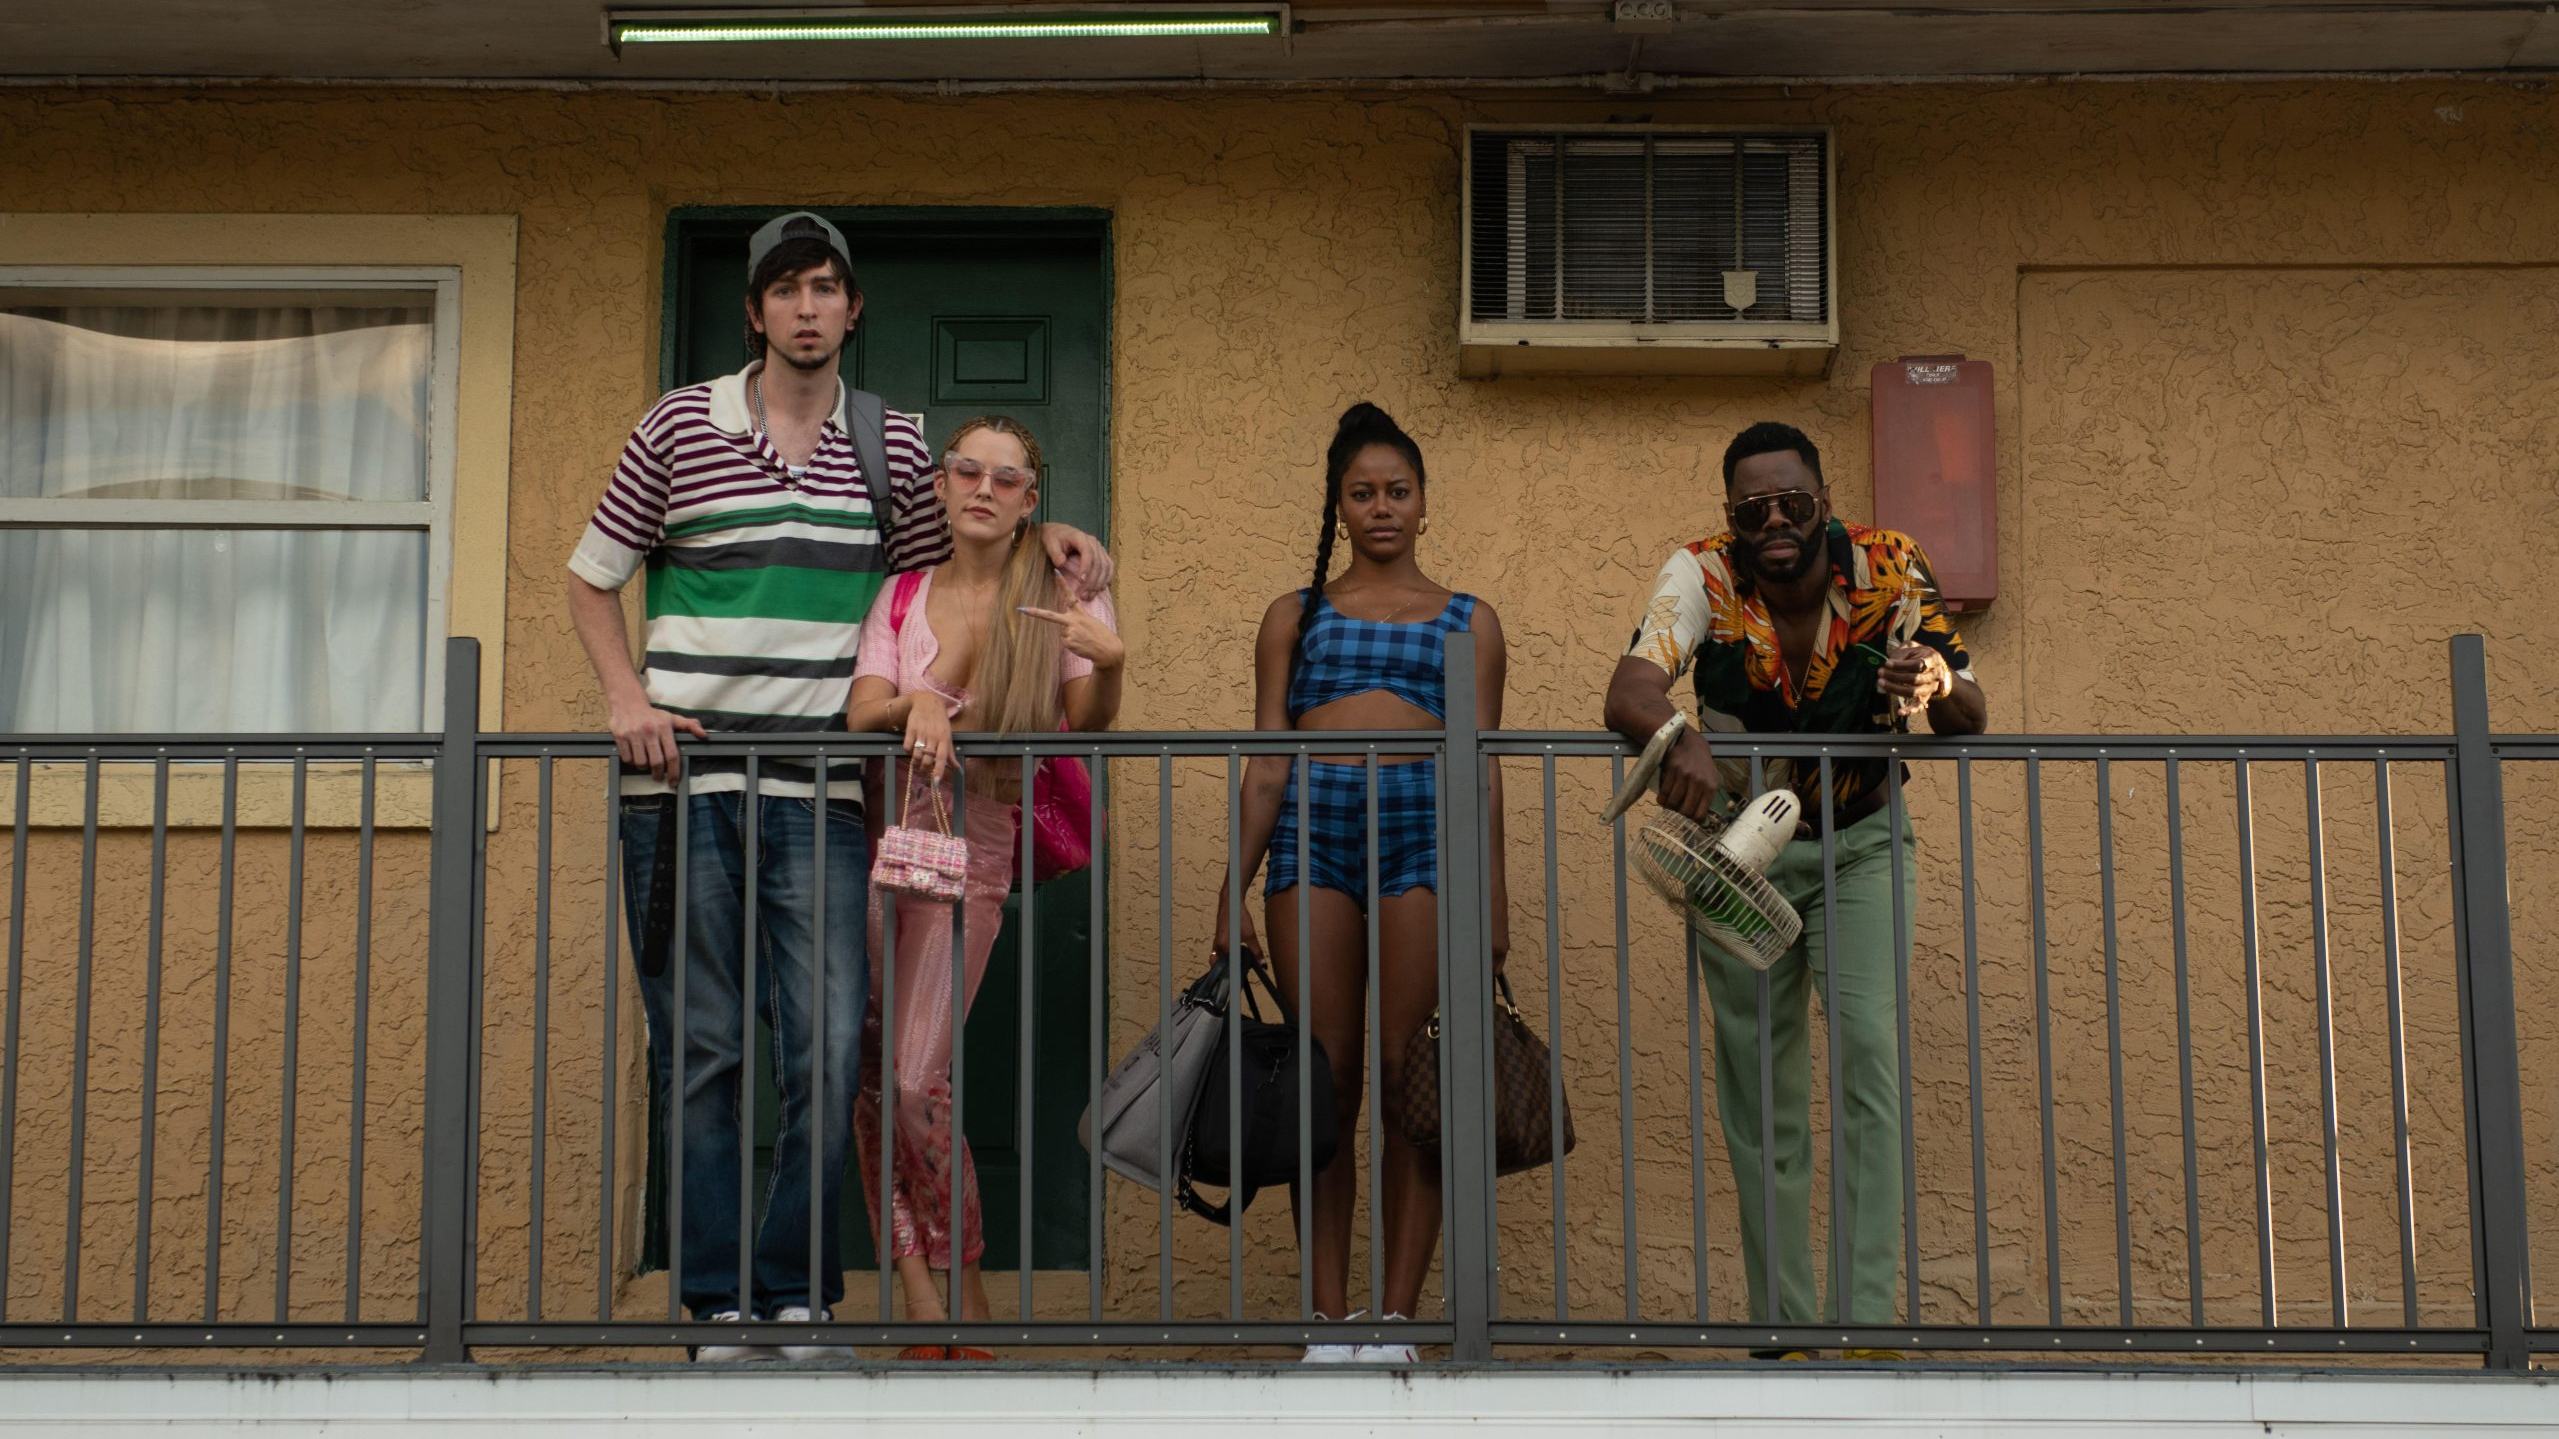 Nicholas Braun, Riley Keough, Taylour Paige, and Colman Domingo hanging out together on a balcony as seen in the latest A24 film ZOLA. 